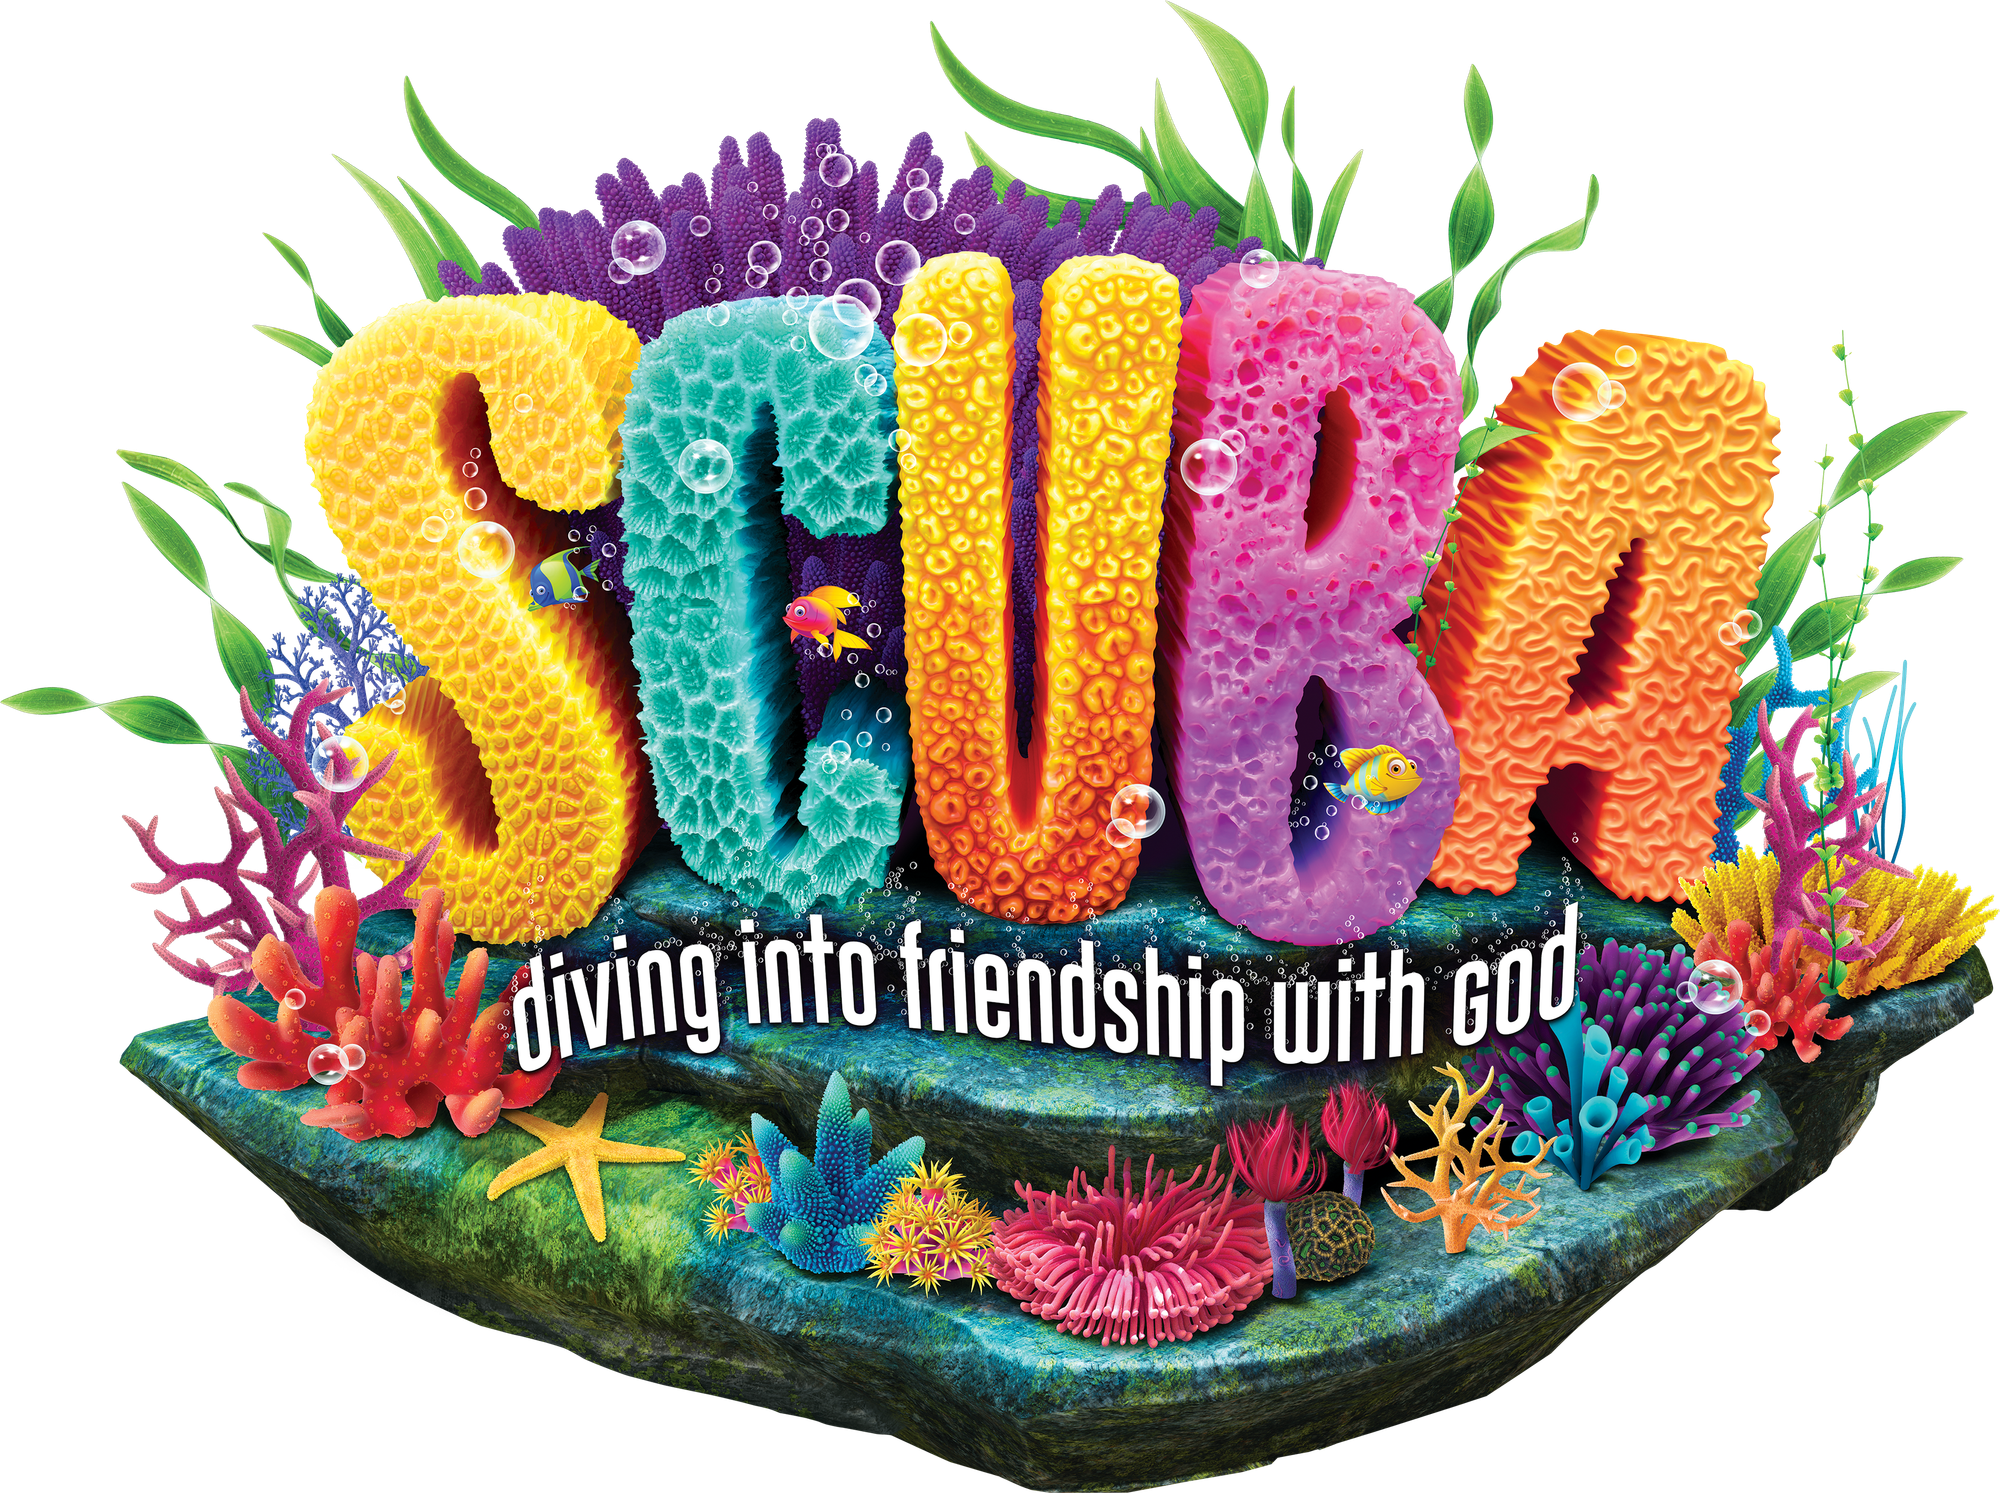 VBS July 14-18